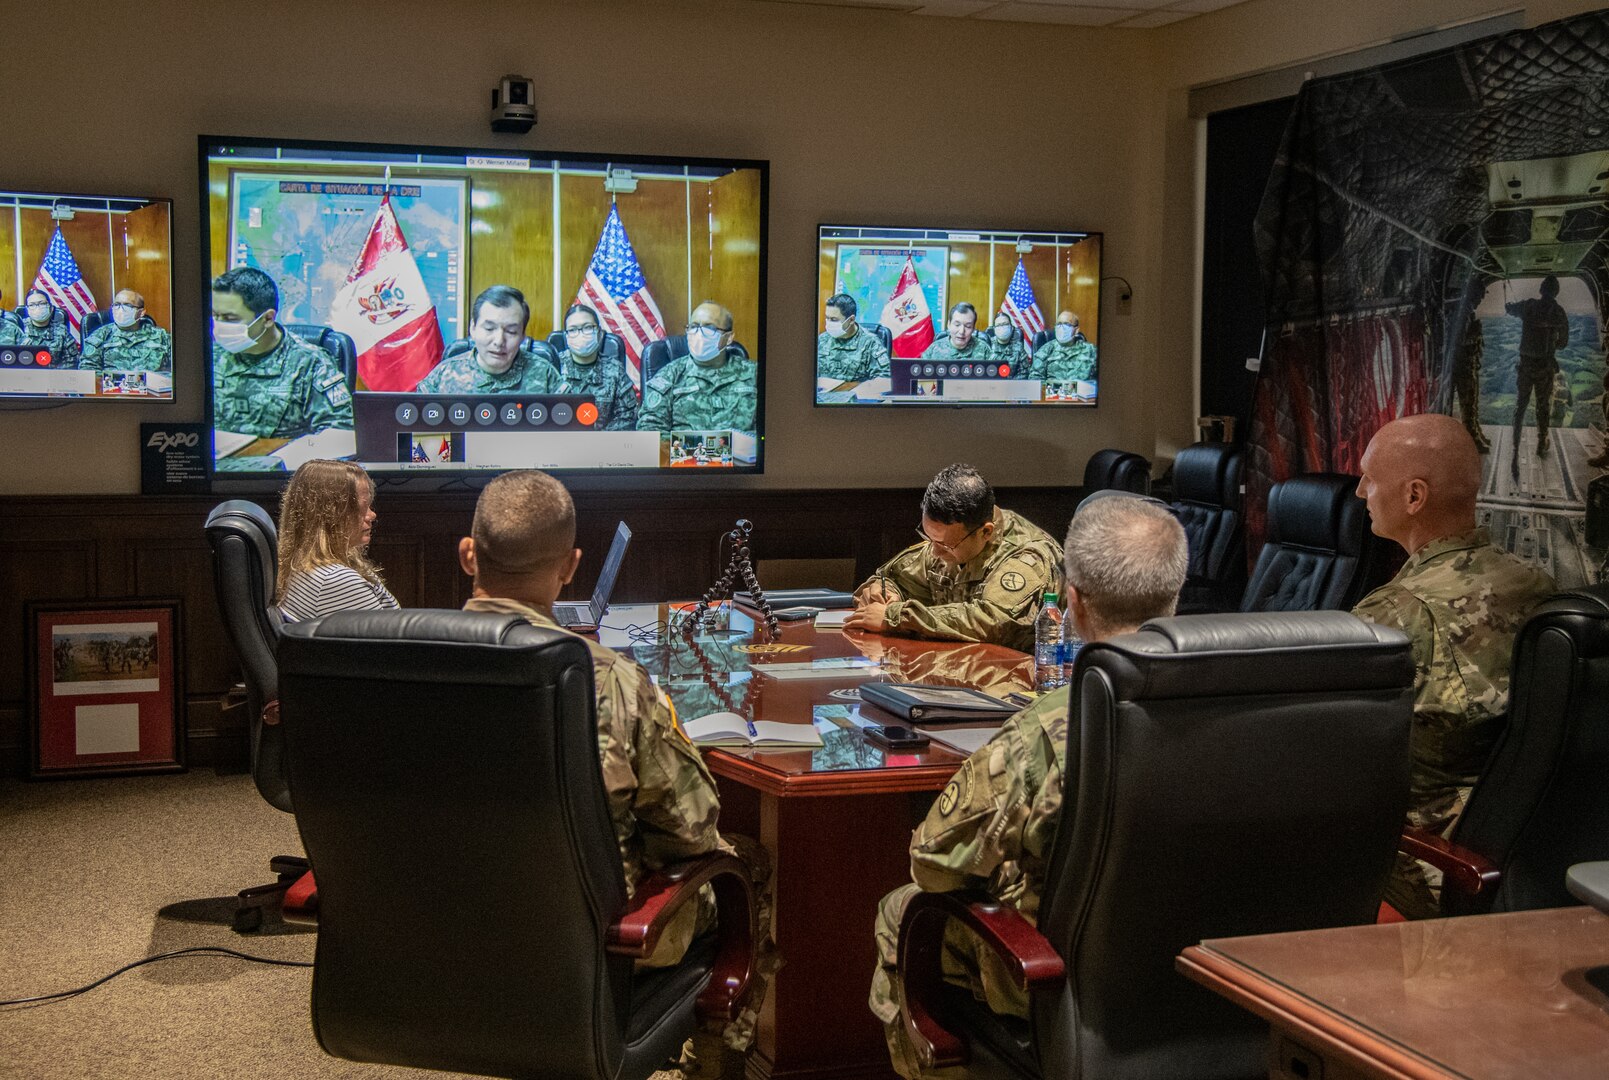 Leaders of the West Virginia National Guard (WVNG) held a video conference call with their State Partnership Program (SPP) counterparts in Perú to discuss COVID-19 military response efforts and best practices June 11, 2020.